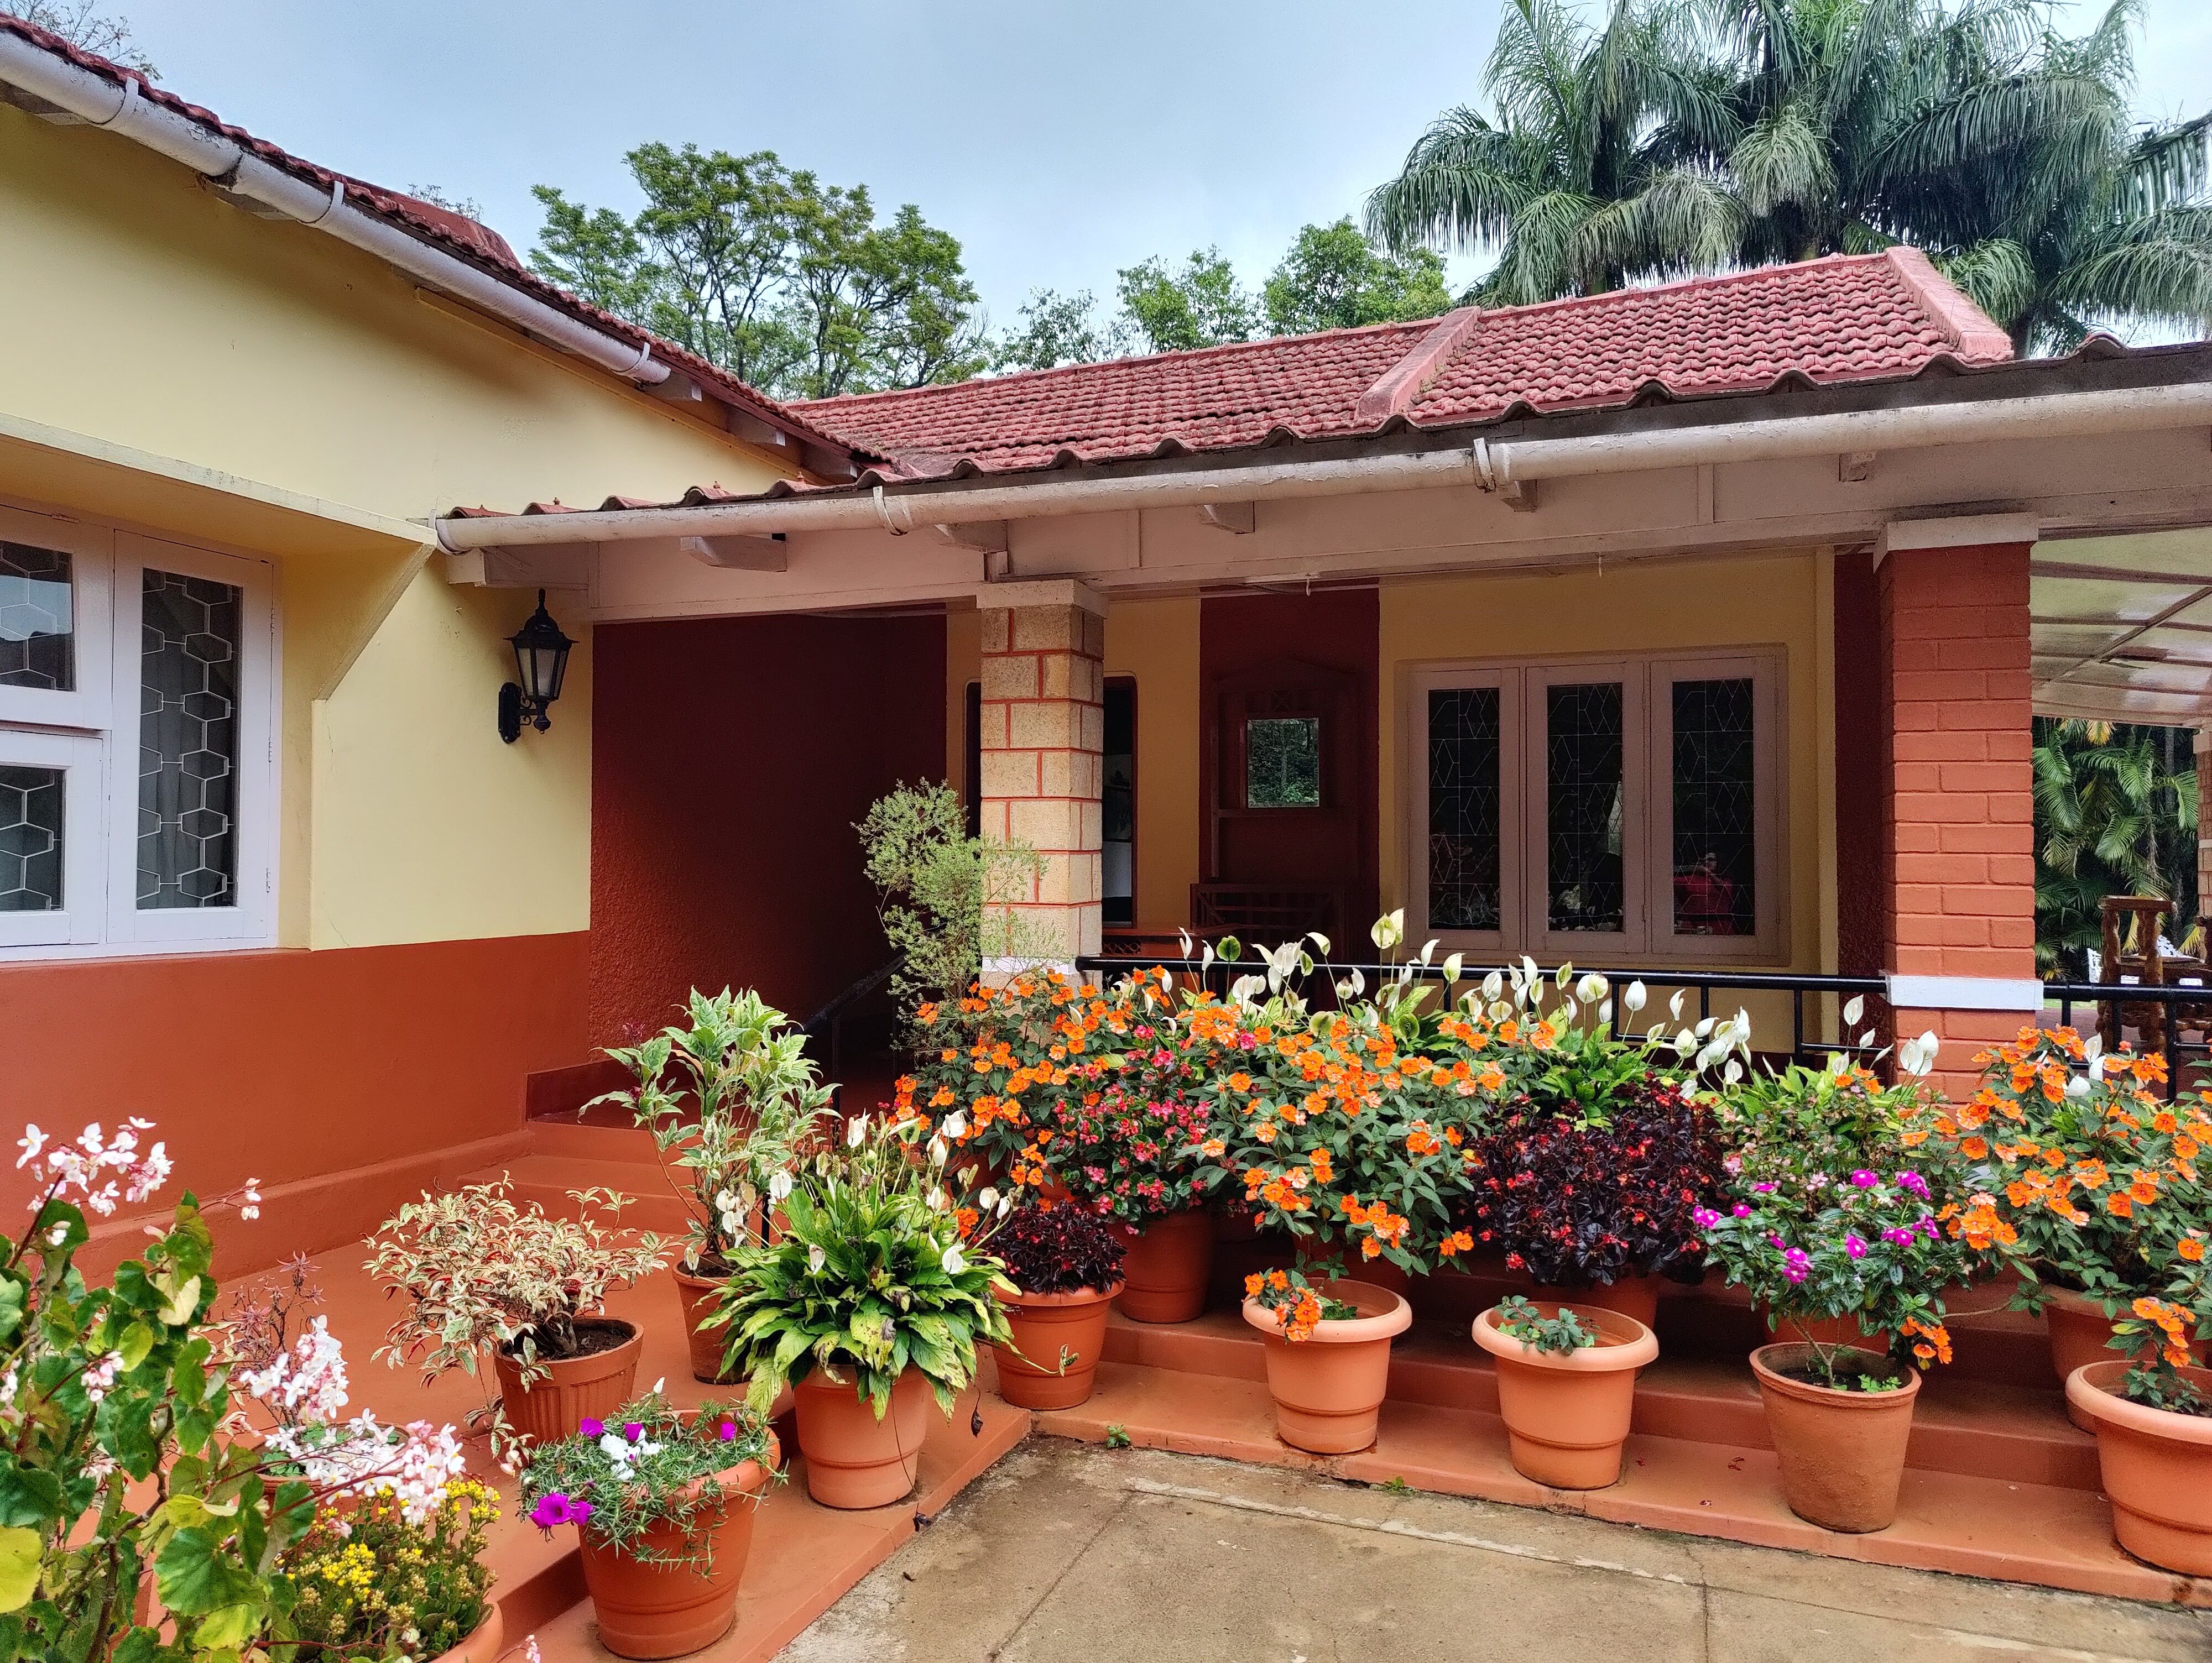 India’s first recorded coffee plantation was in the southern state of Karnataka at Chikmagalur, where today, family-run plantations offer luxury homestays, and guests can visit temples and a nearby wildlife sanctuary. Photo: Kalpana Sunder